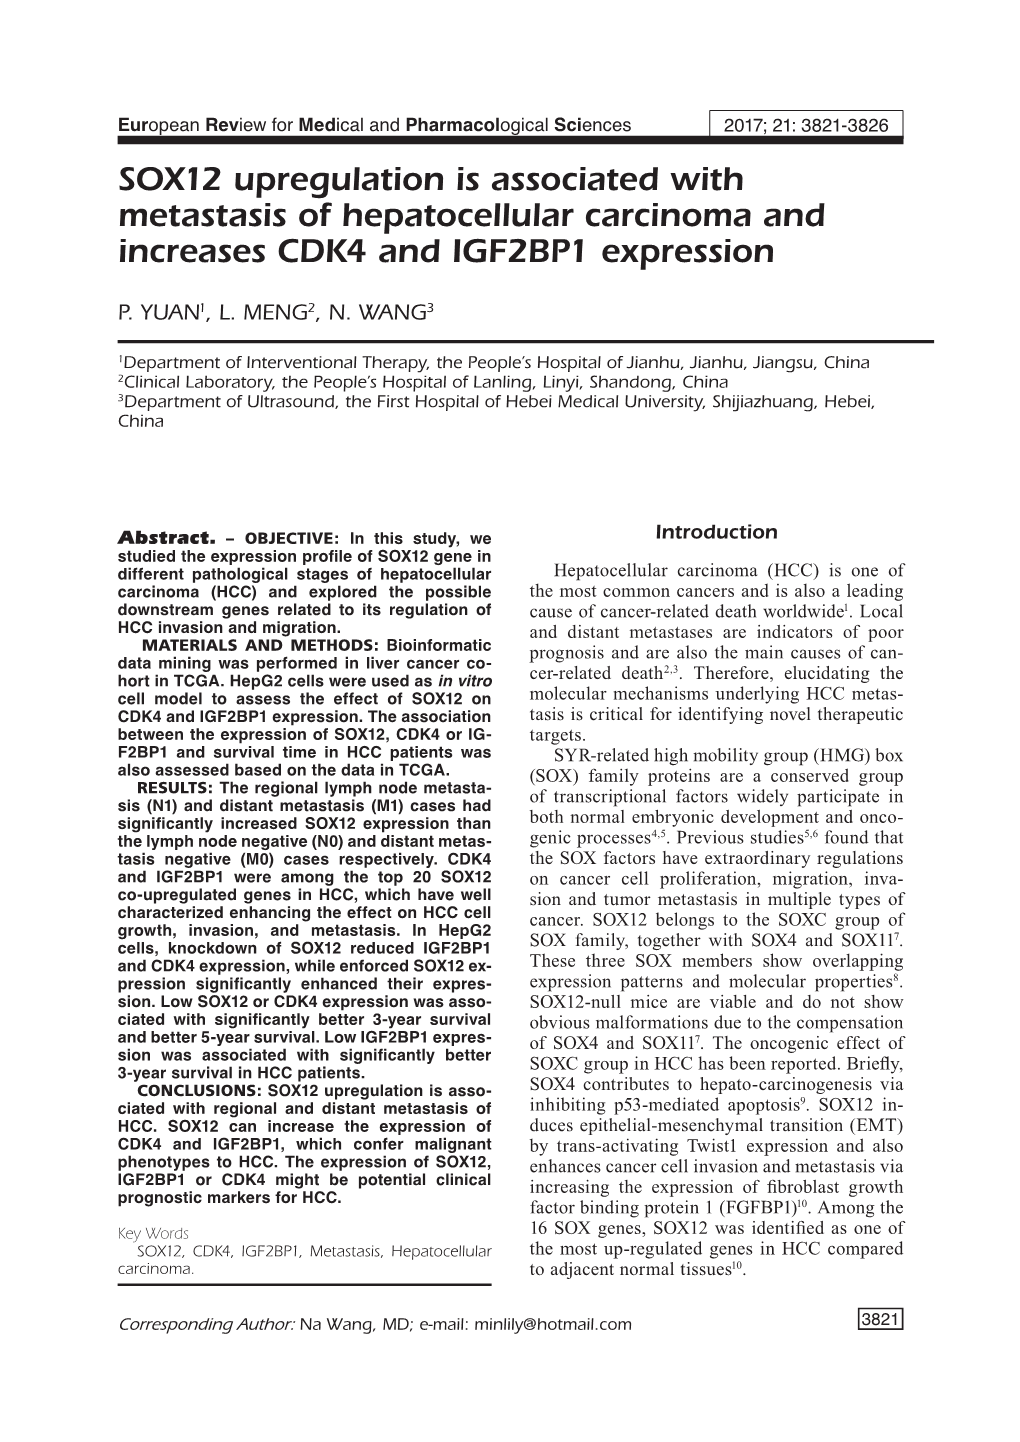 SOX12 Upregulation Is Associated with Metastasis of Hepatocellular Carcinoma and Increases CDK4 and IGF2BP1 Expression